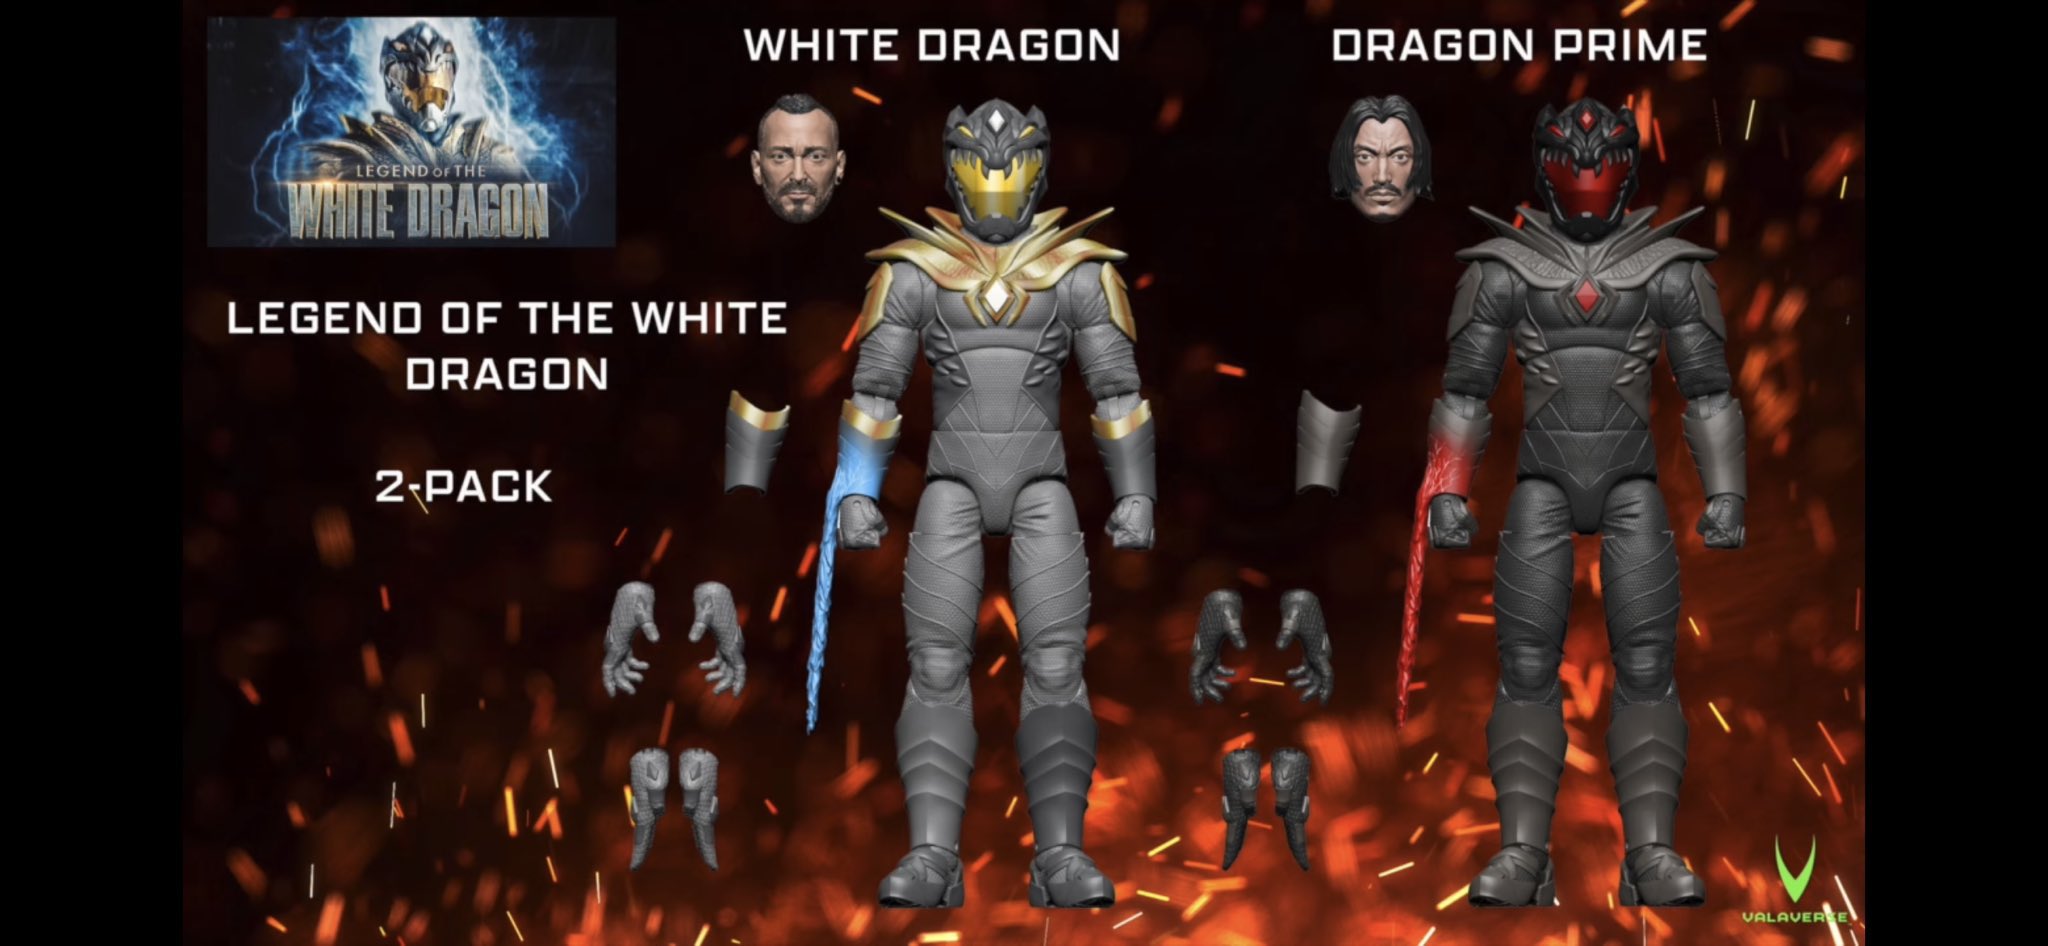 Valaverse to Release Legend of the White Dragon Figures - Tokunation